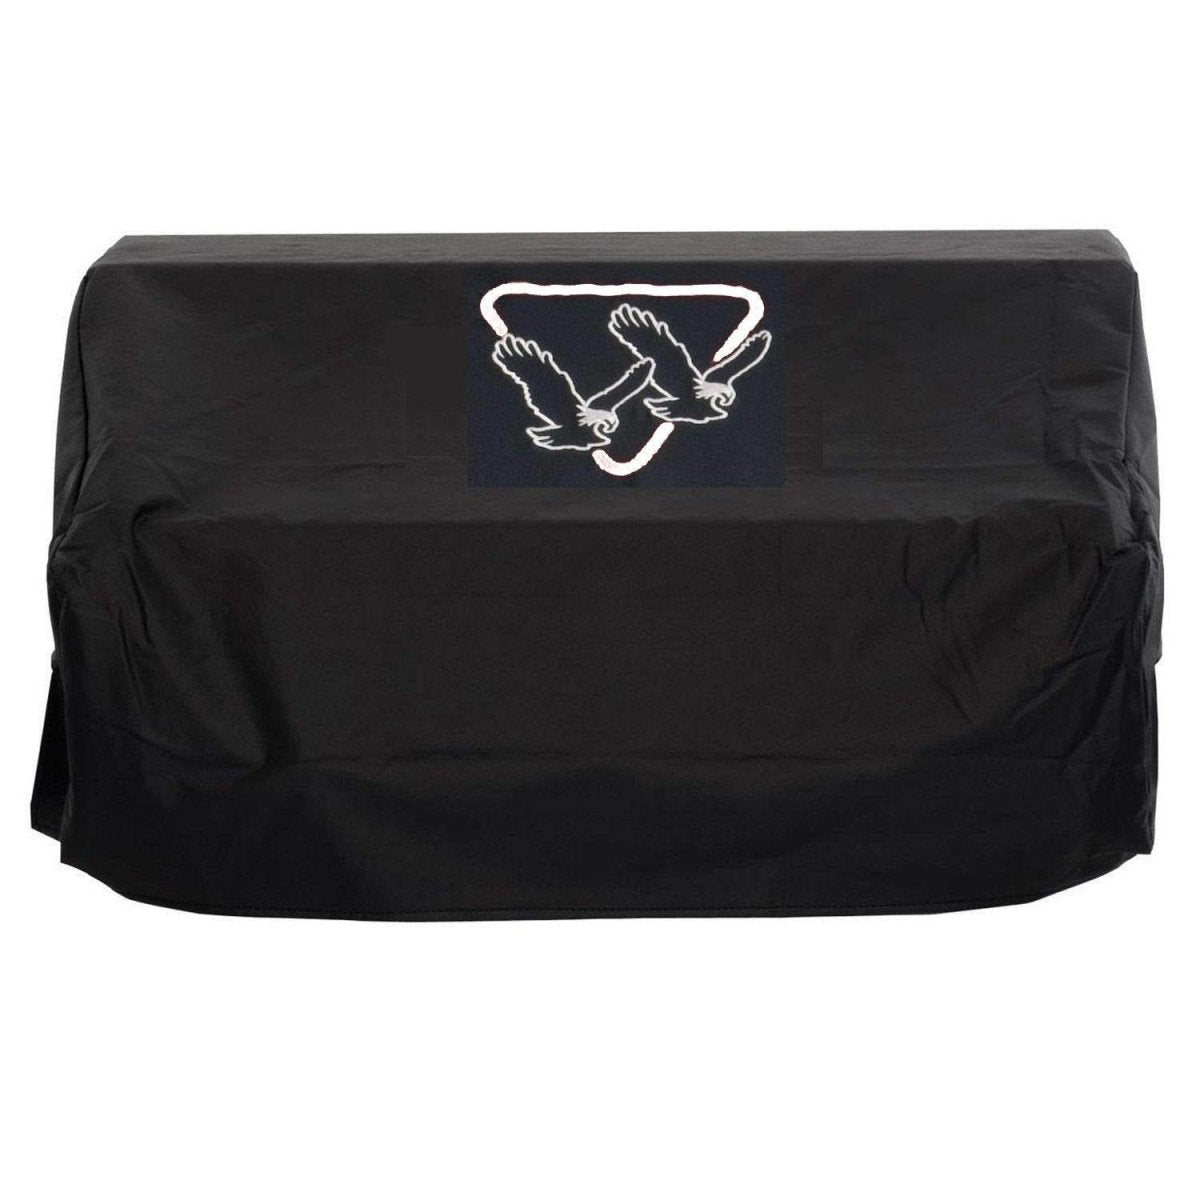 Twin Eagles VCPG36 Vinyl Cover for 36-Inch Built-In Smoker/Pellet Grill - Texas Star Grill Shop VCPG36